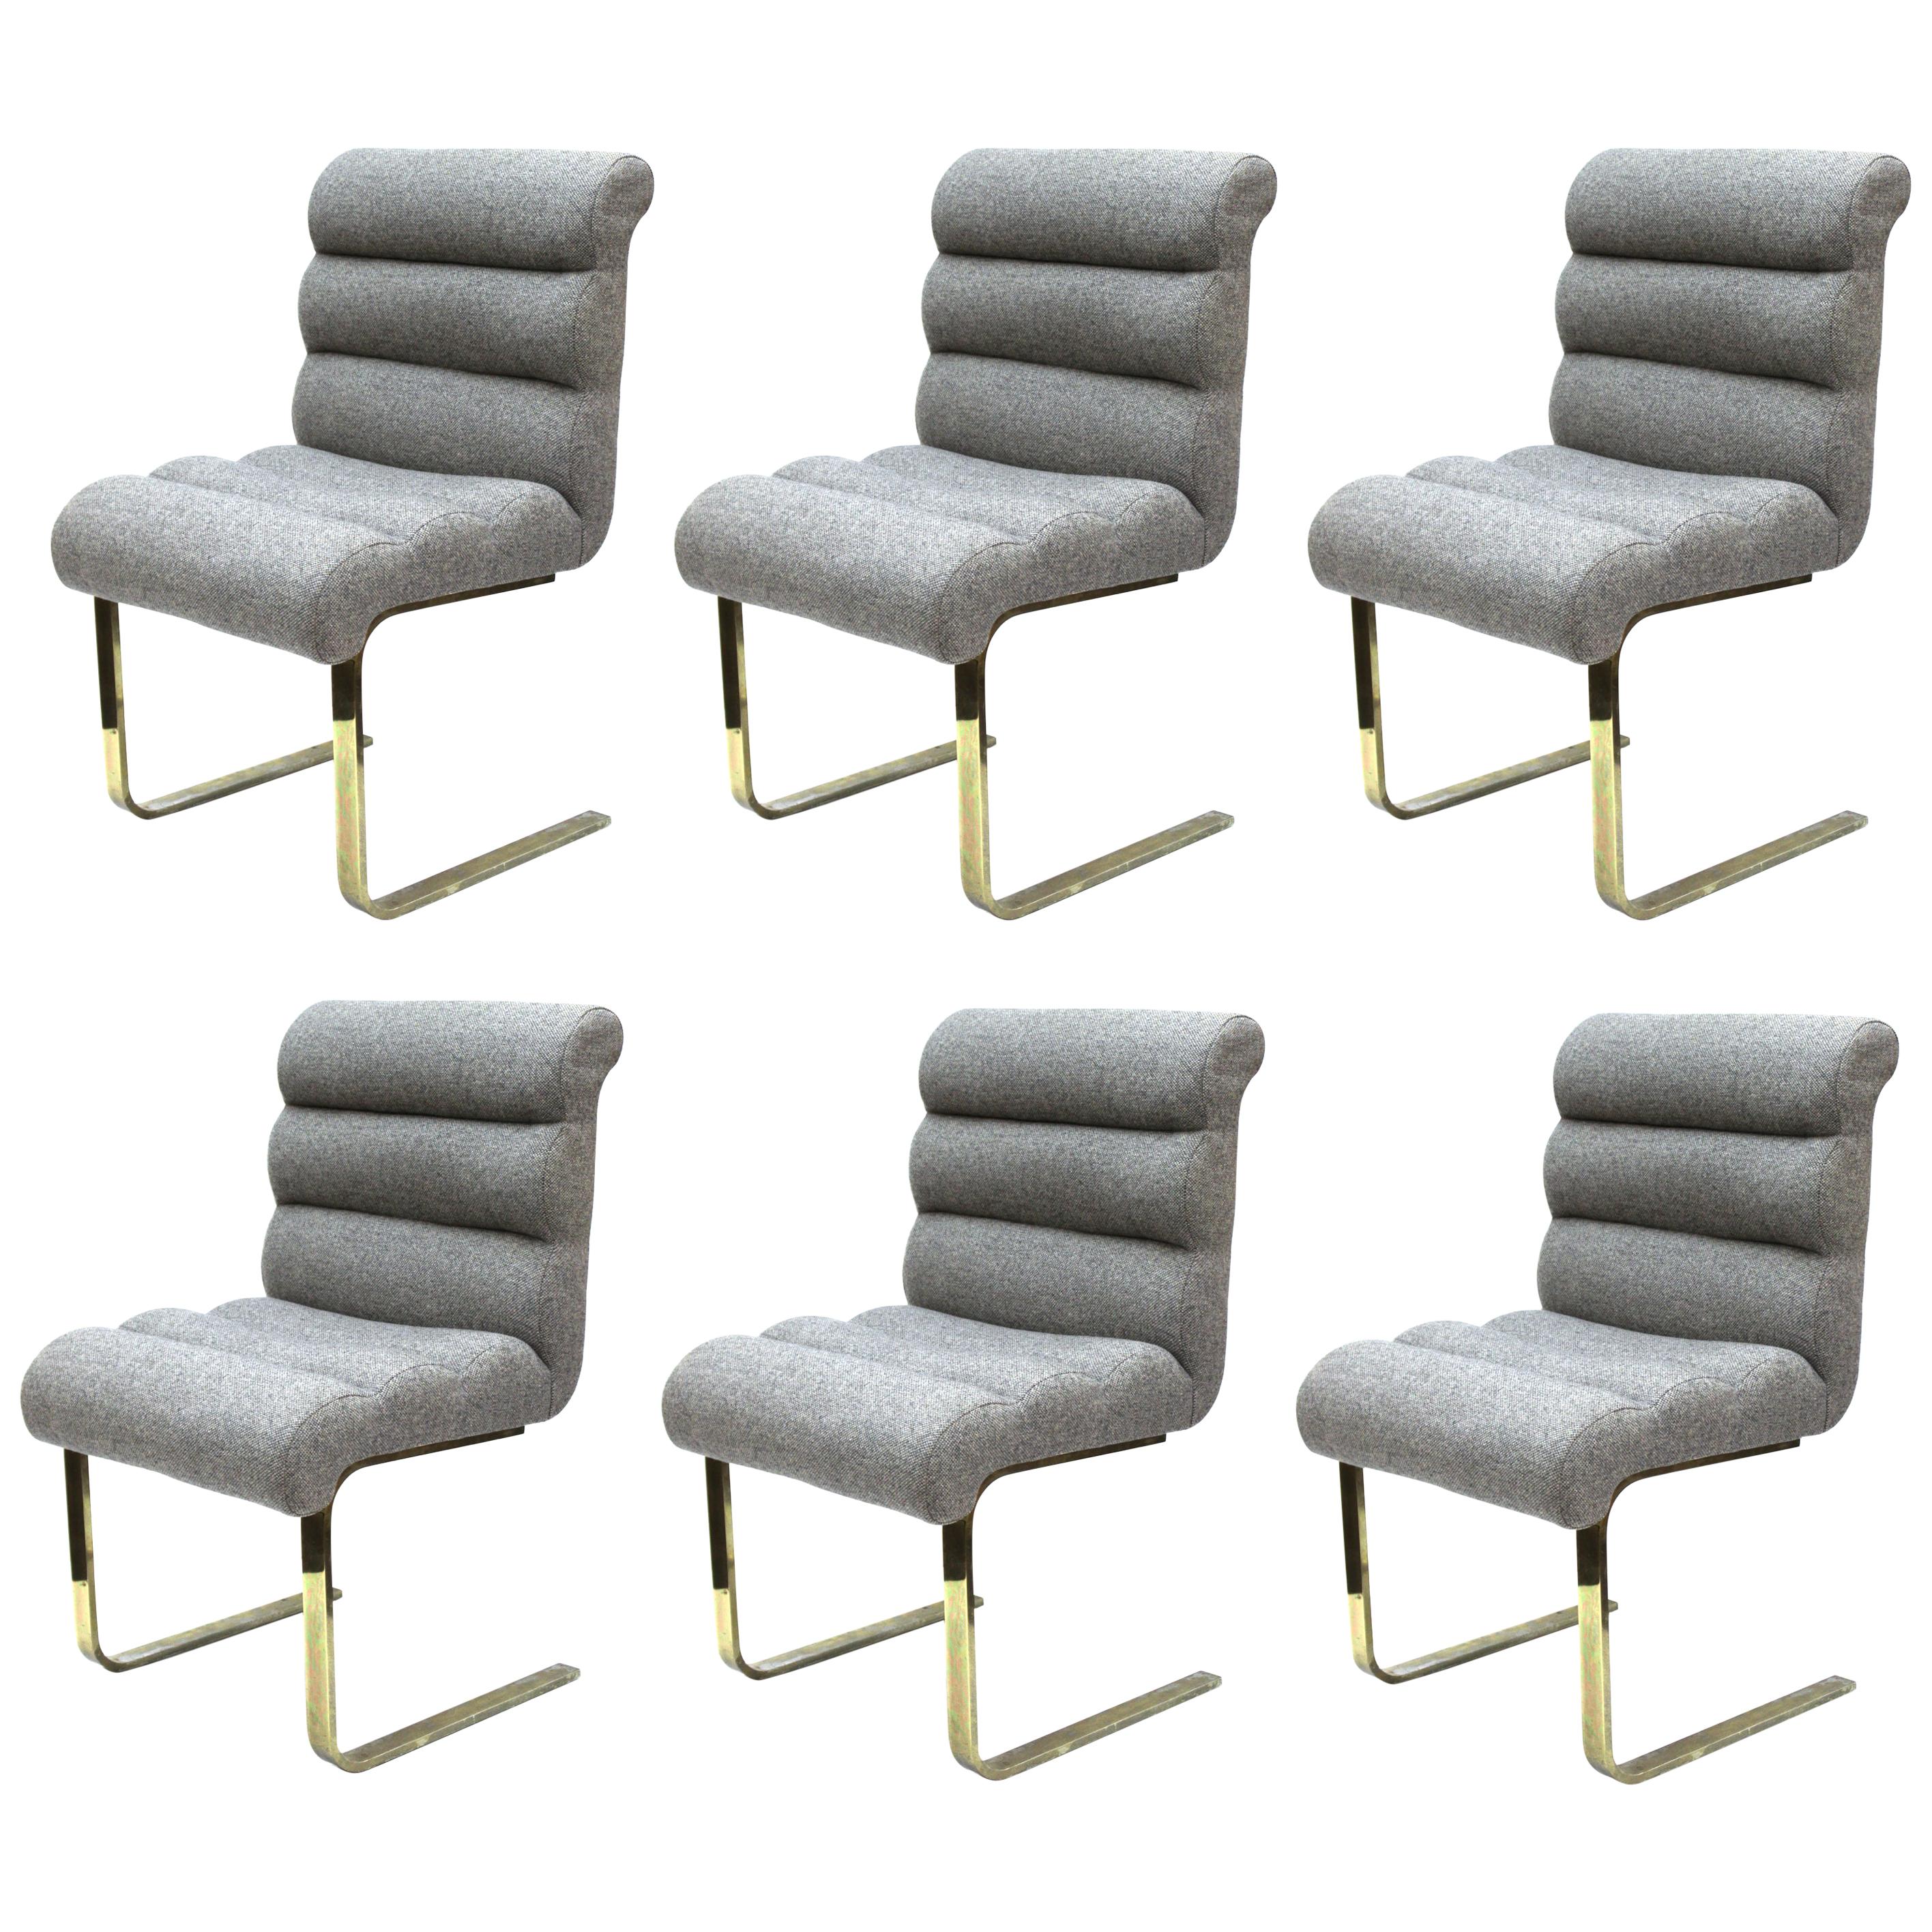 Frank Mariano for Pace Modern Cantilevered Dining Chairs